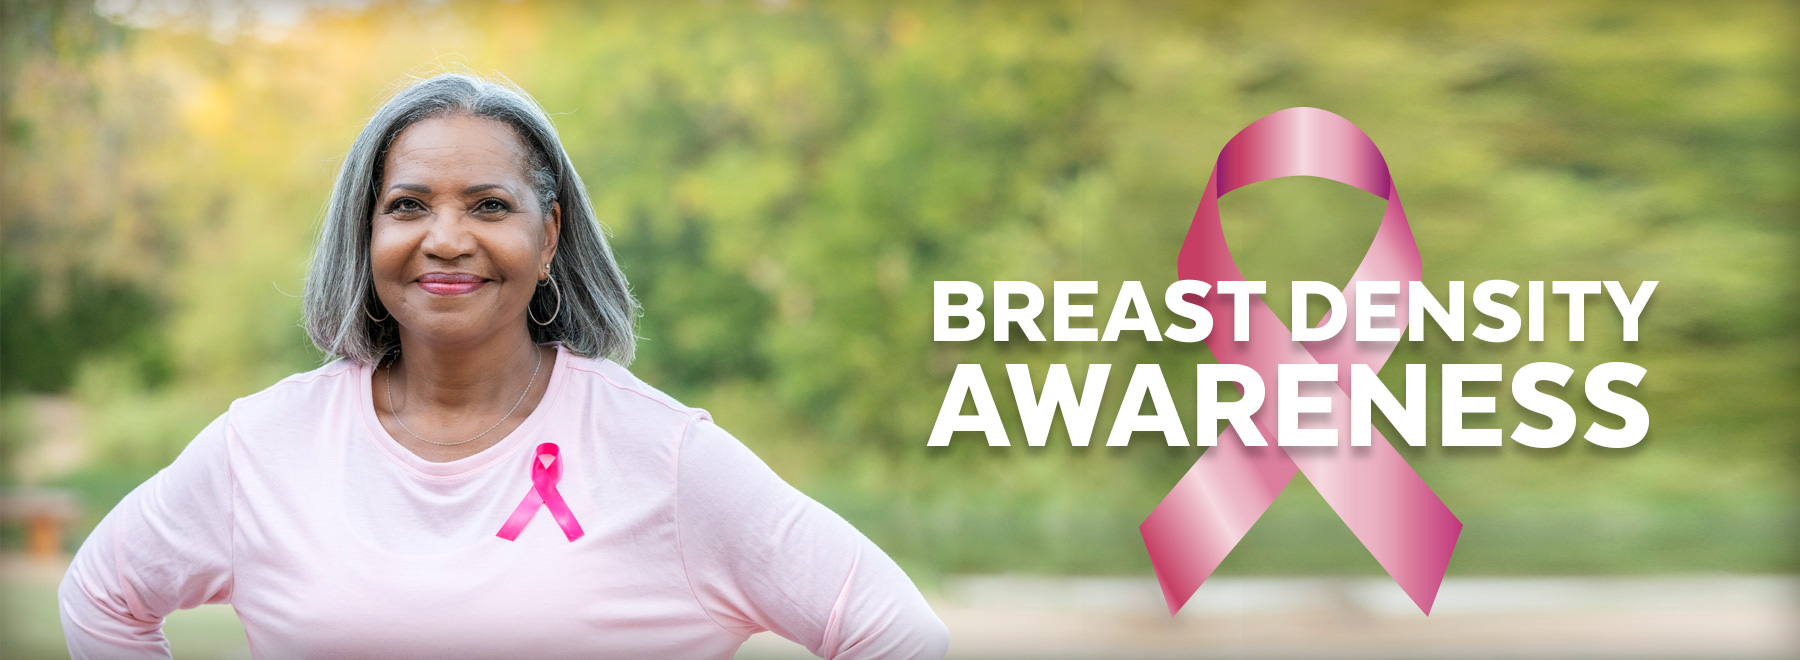 Photo of African american woman with pink shirt and breast cancer ribbon on it.